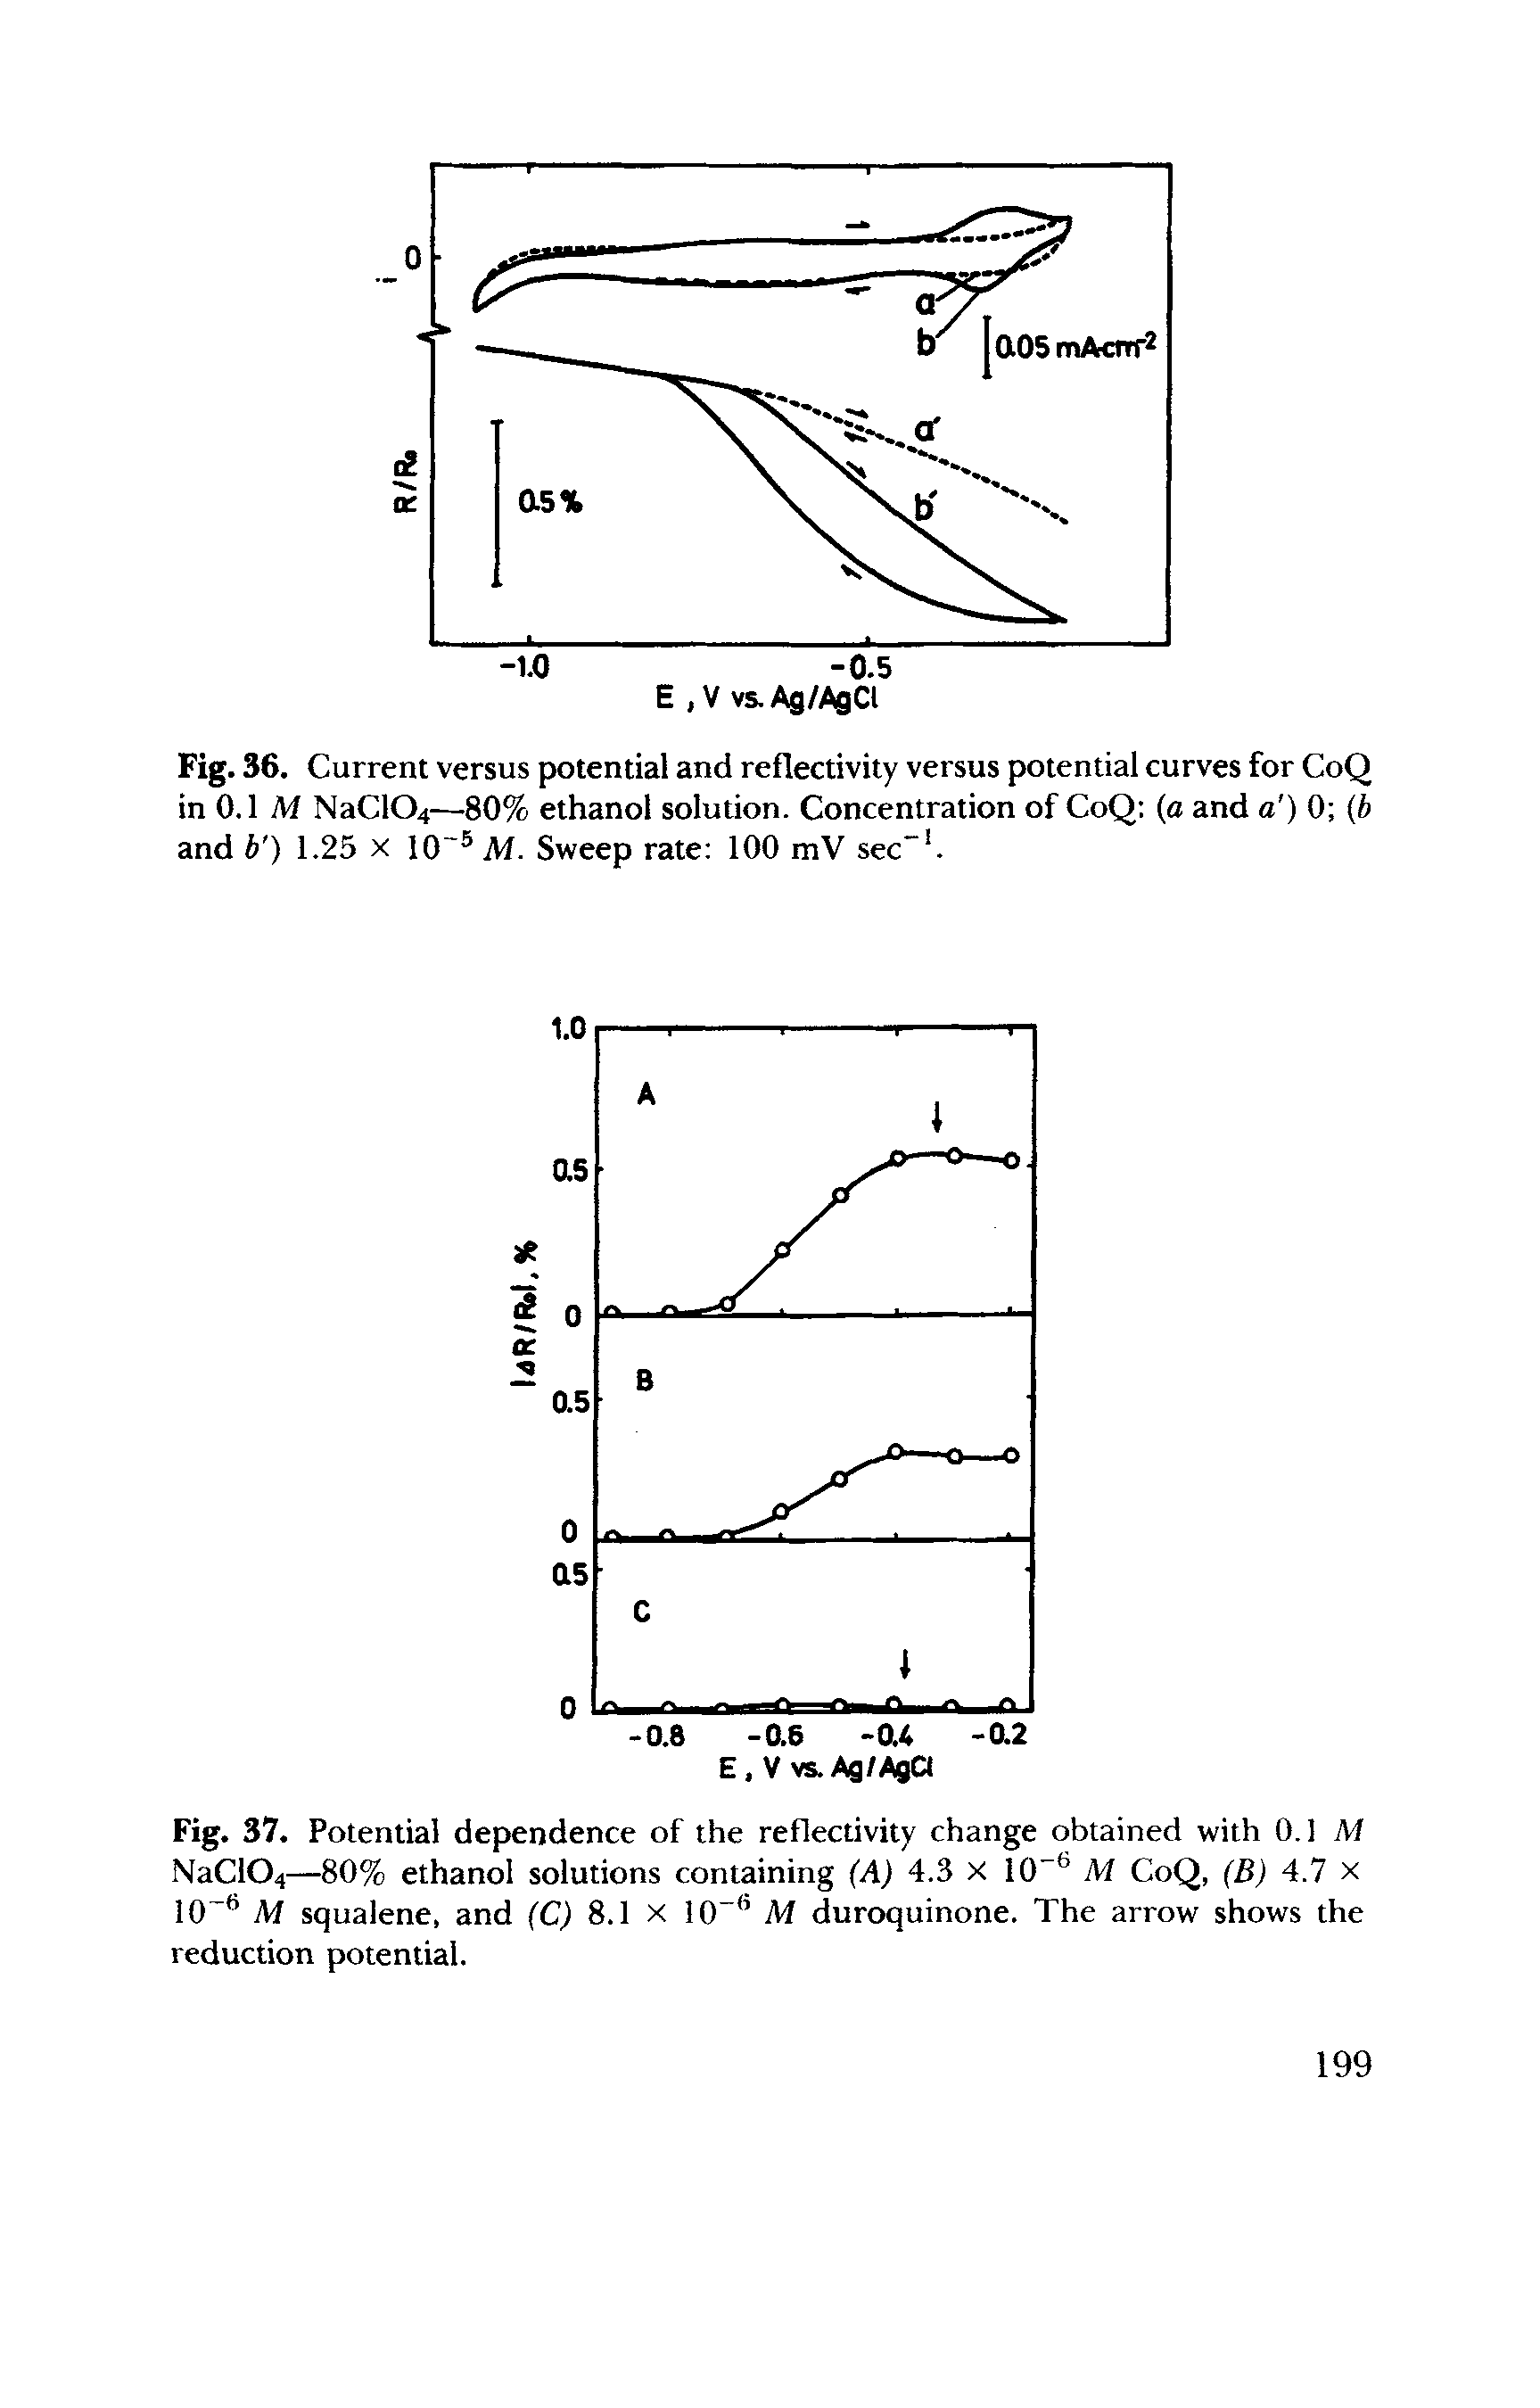 Fig. 37. Potential dependence of the reflectivity change obtained with 0.1 M NaC104—80% ethanol solutions containing (A) 4.3 x lO M CoQ, (B) 4.7 x 10 M squalene, and (C) 8.1 x 10 M duroquinone. The arrow shows the reduction potential.